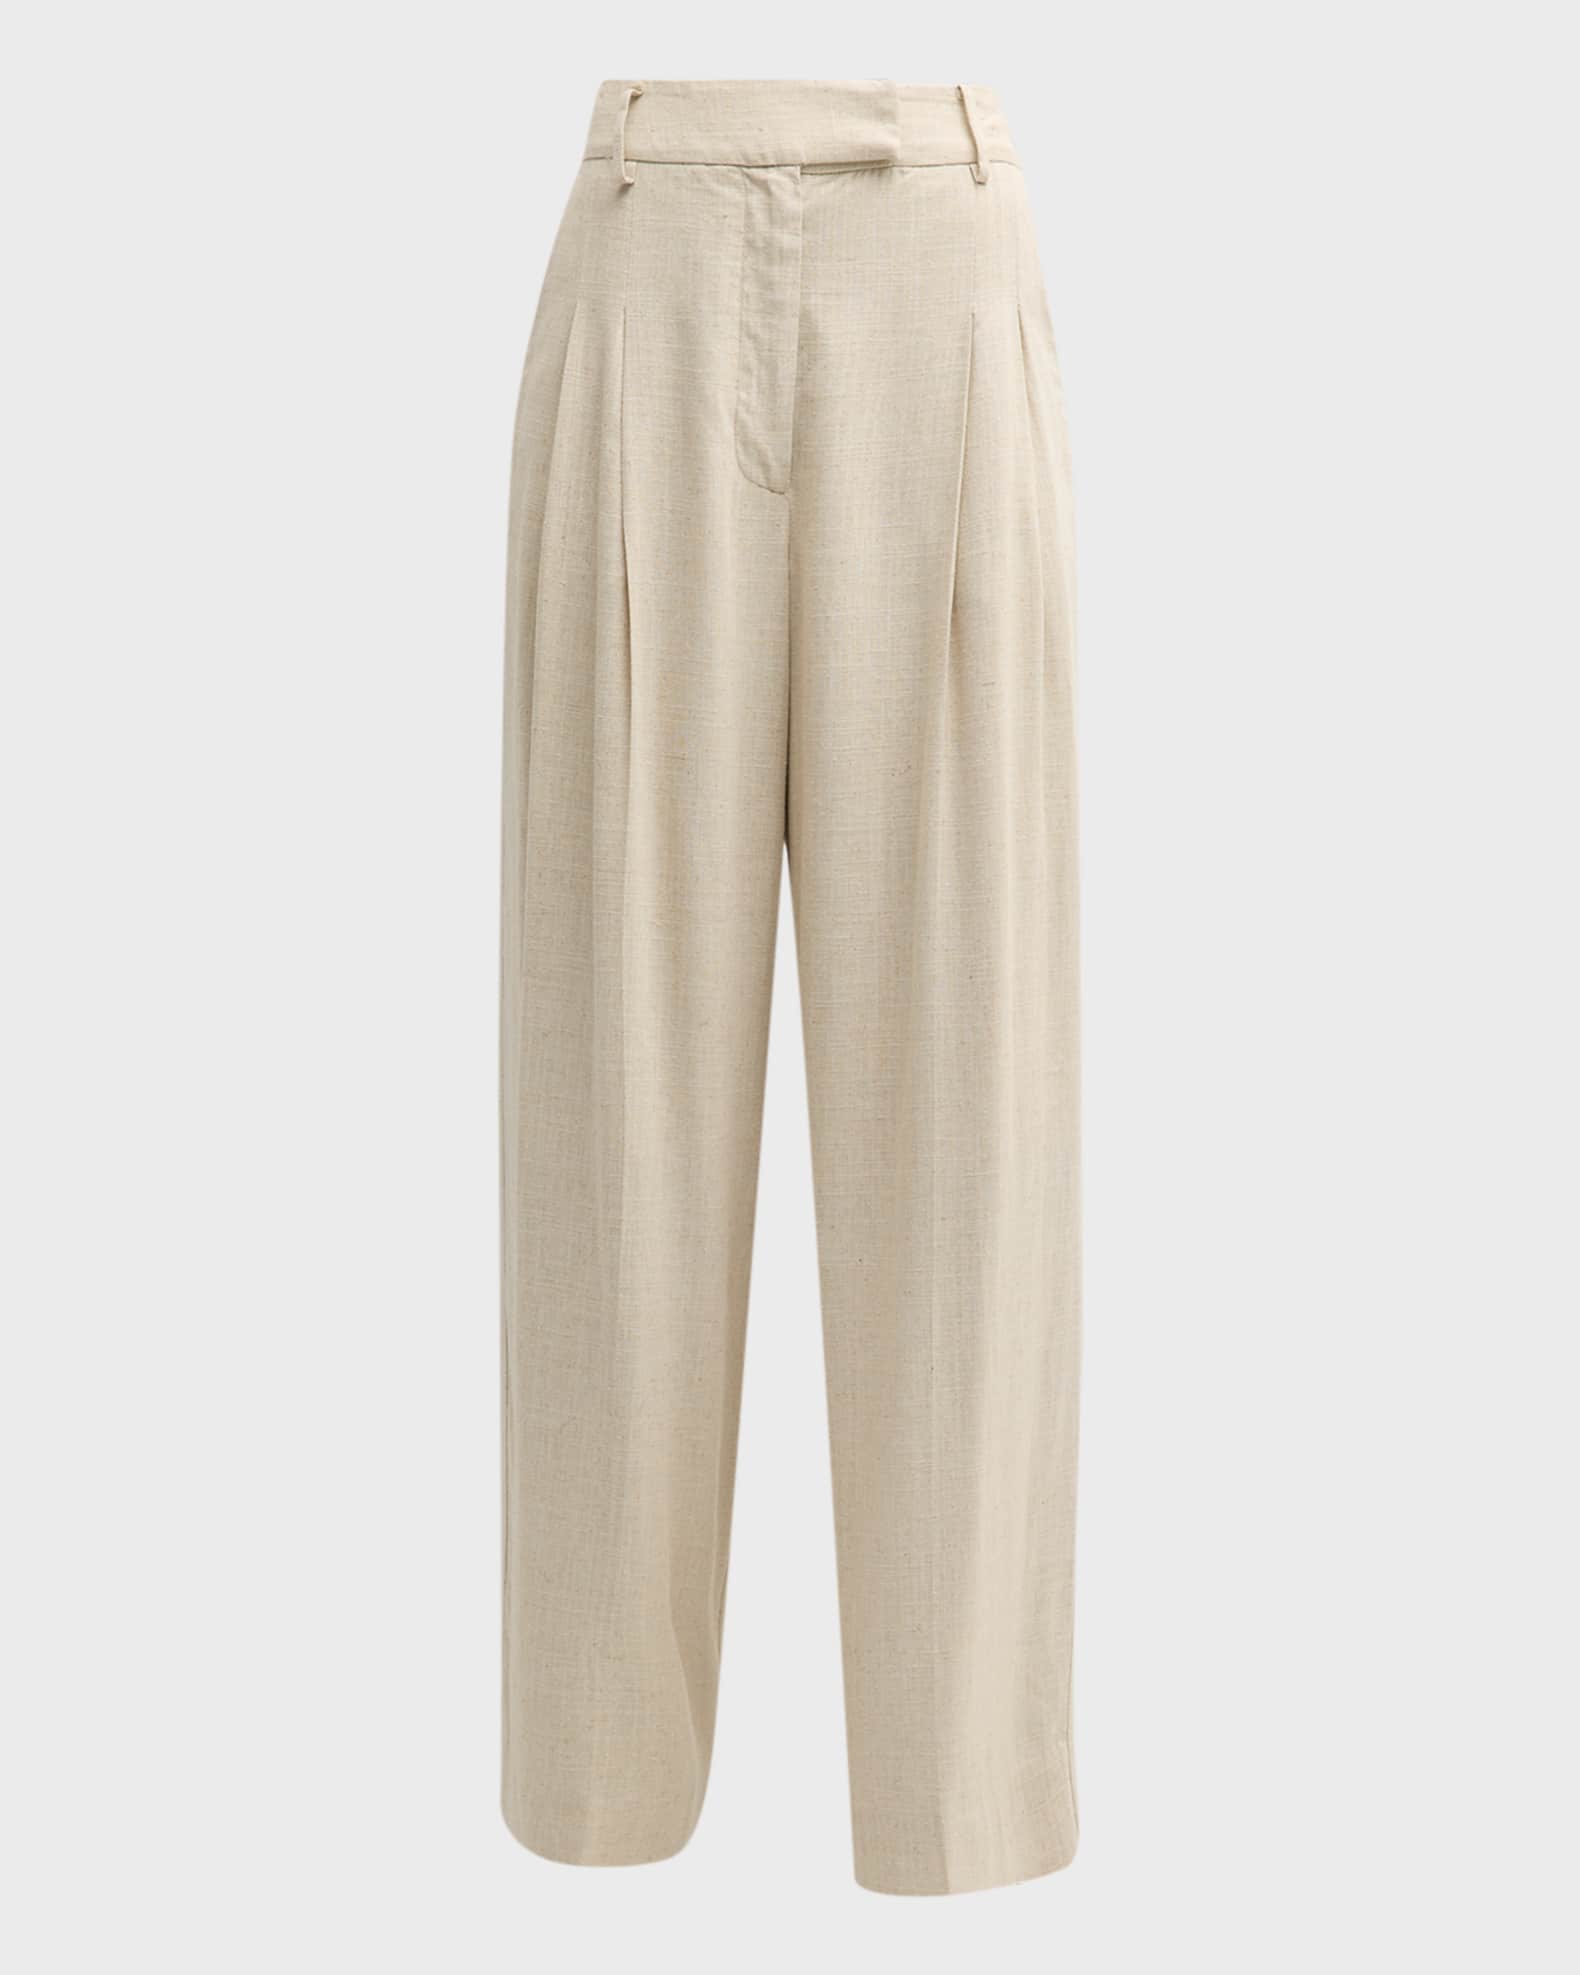 By Malene Birger Cymbaria Wide-Leg Pleated Pants | Neiman Marcus